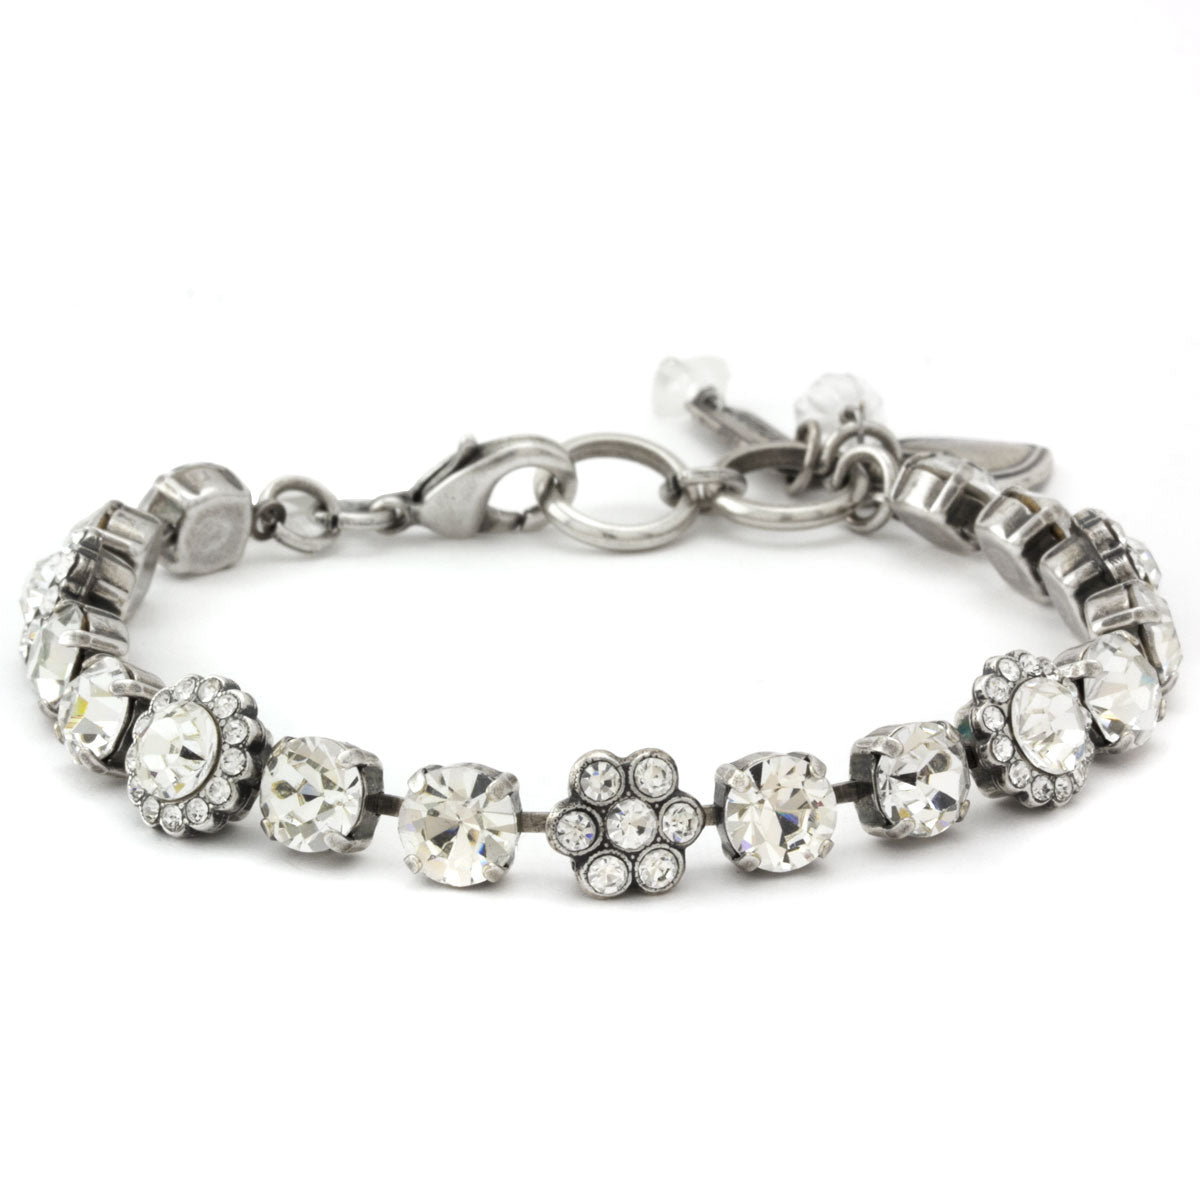 Mariana Silver Must-Have Crystal Flower Bracelet in "On a Clear Day"